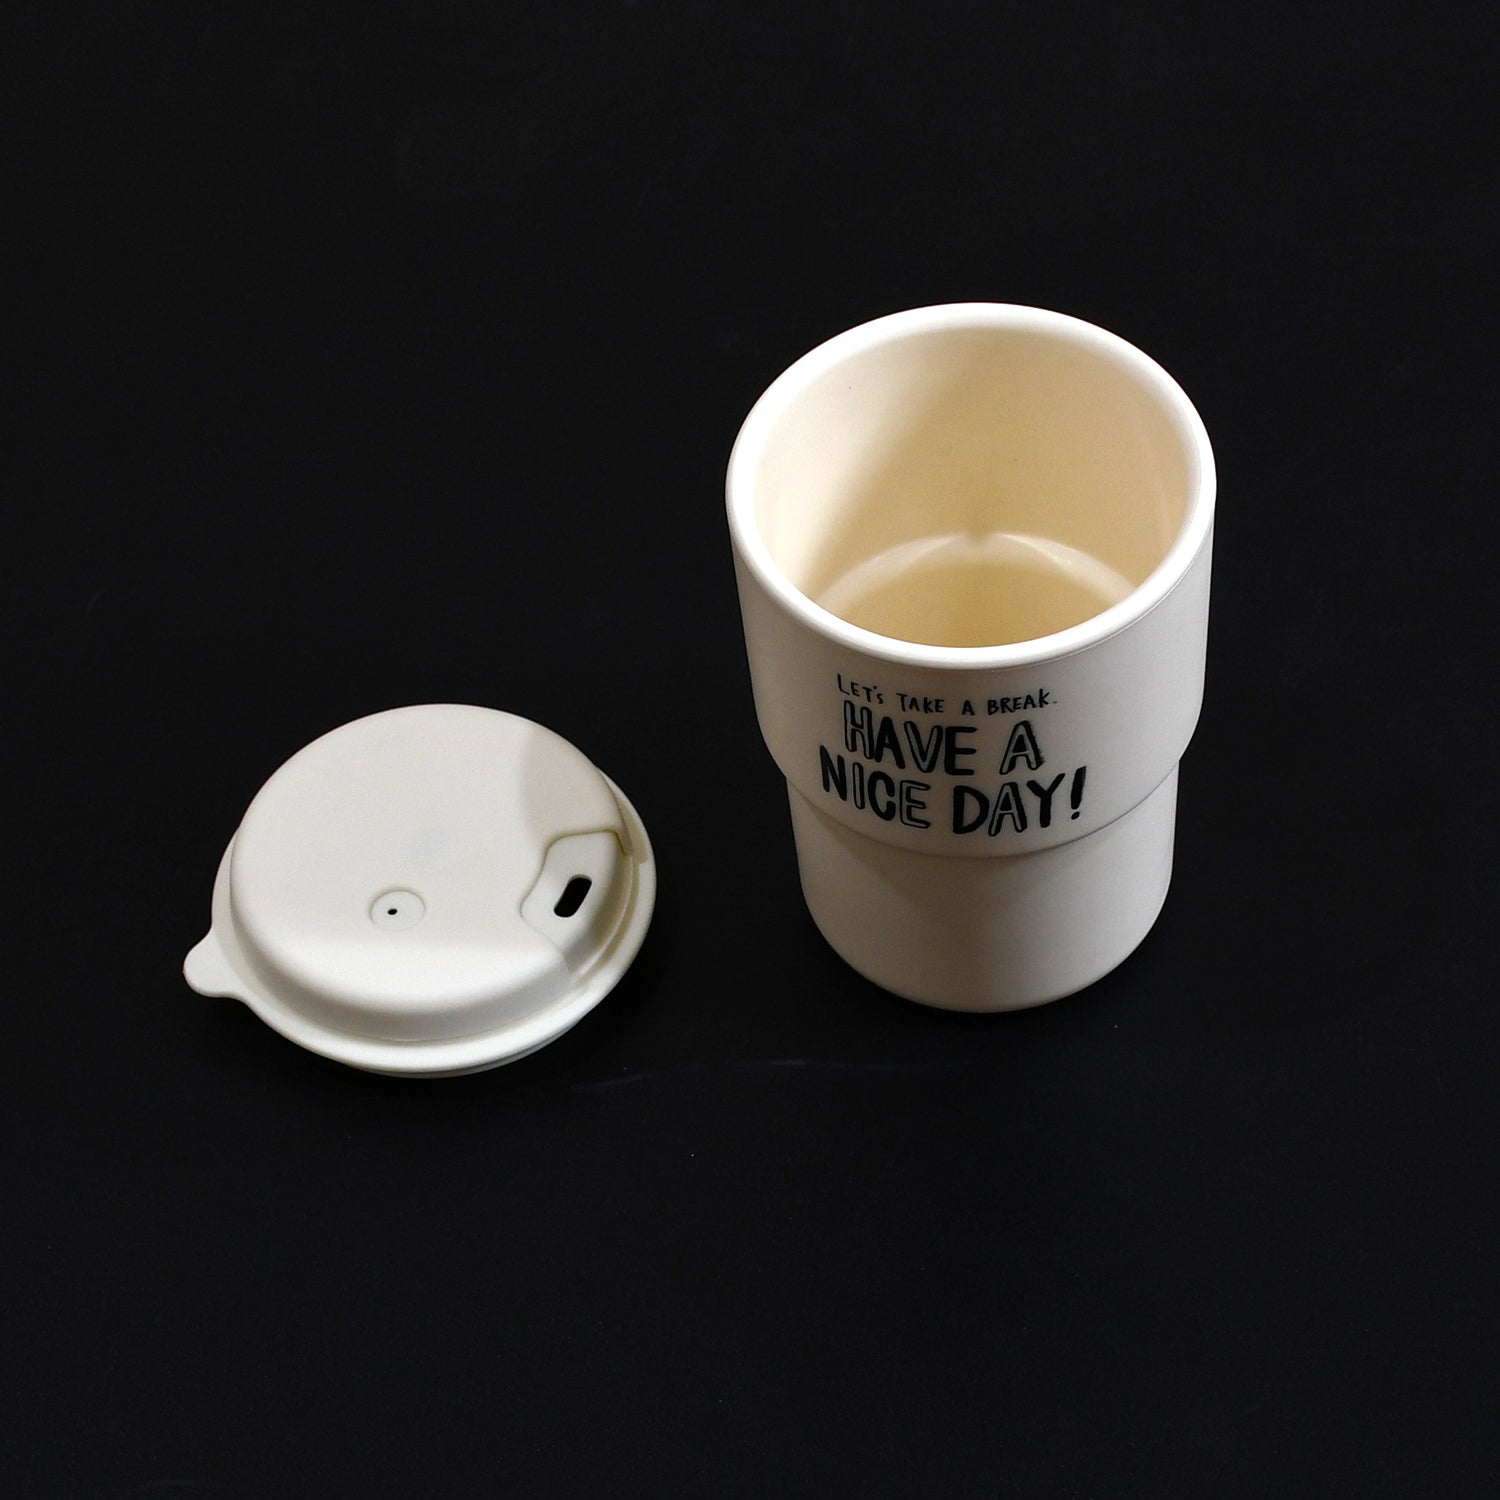 7178 Appreciation and Motivation Portable Plastic Coffee Cup for Travel, Home, Office, Gift for Travel Lovers